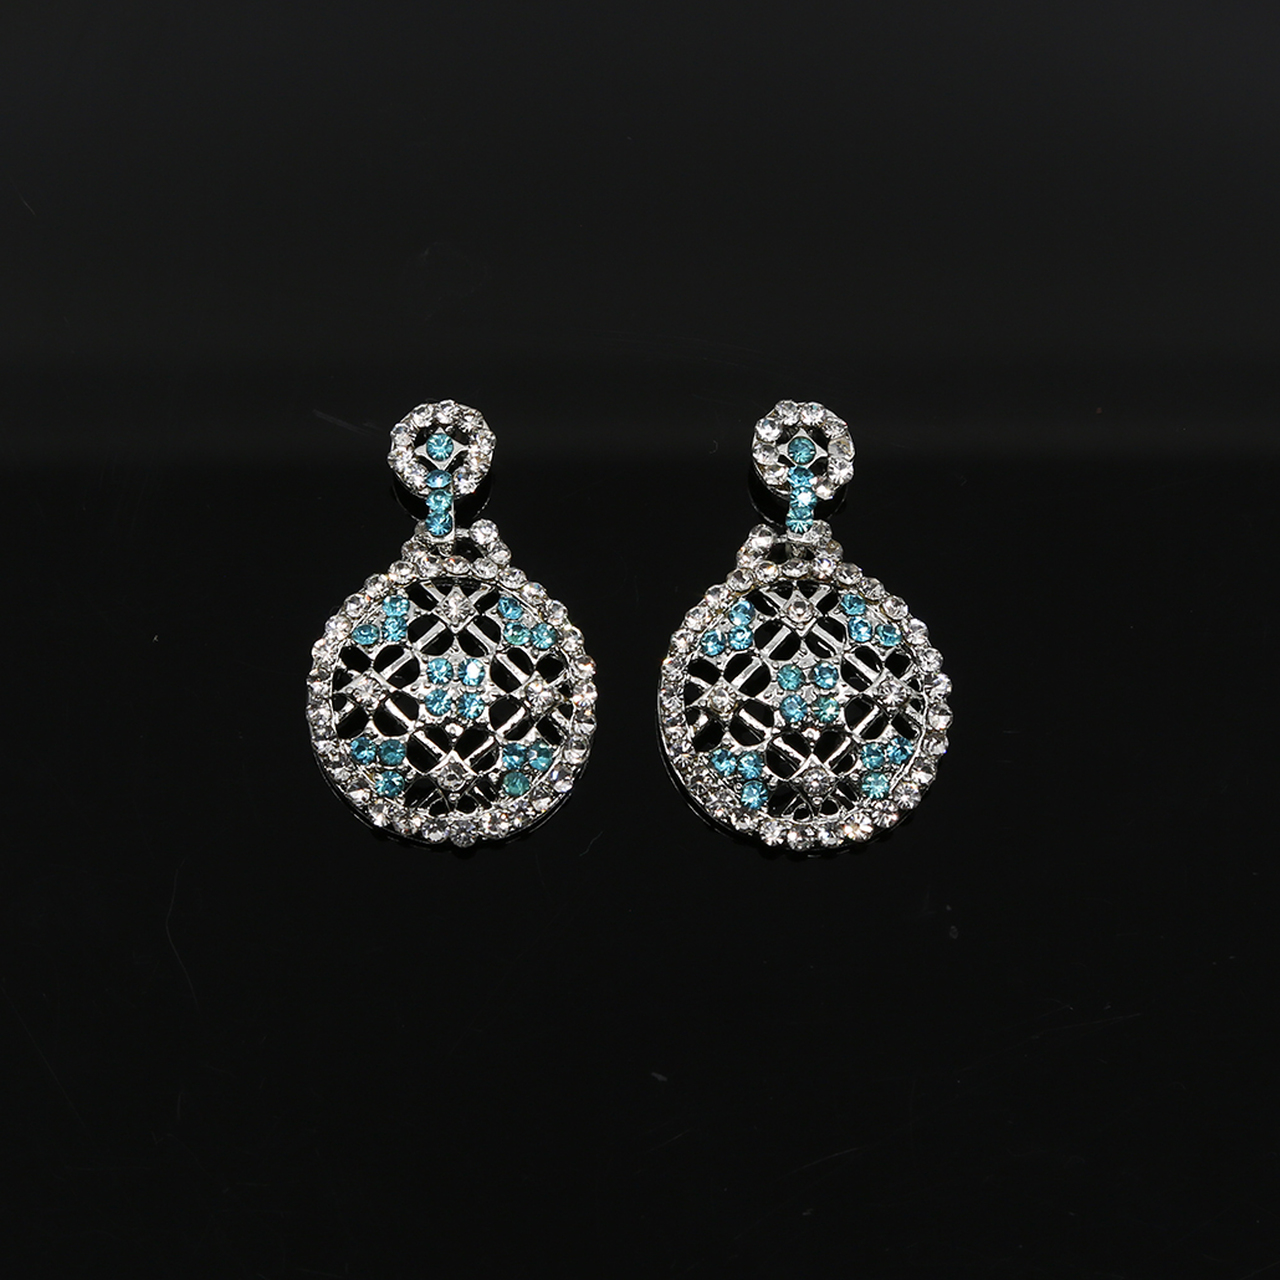 Fashion Earrings With Blue Topaz And Clear Cz Stones On A